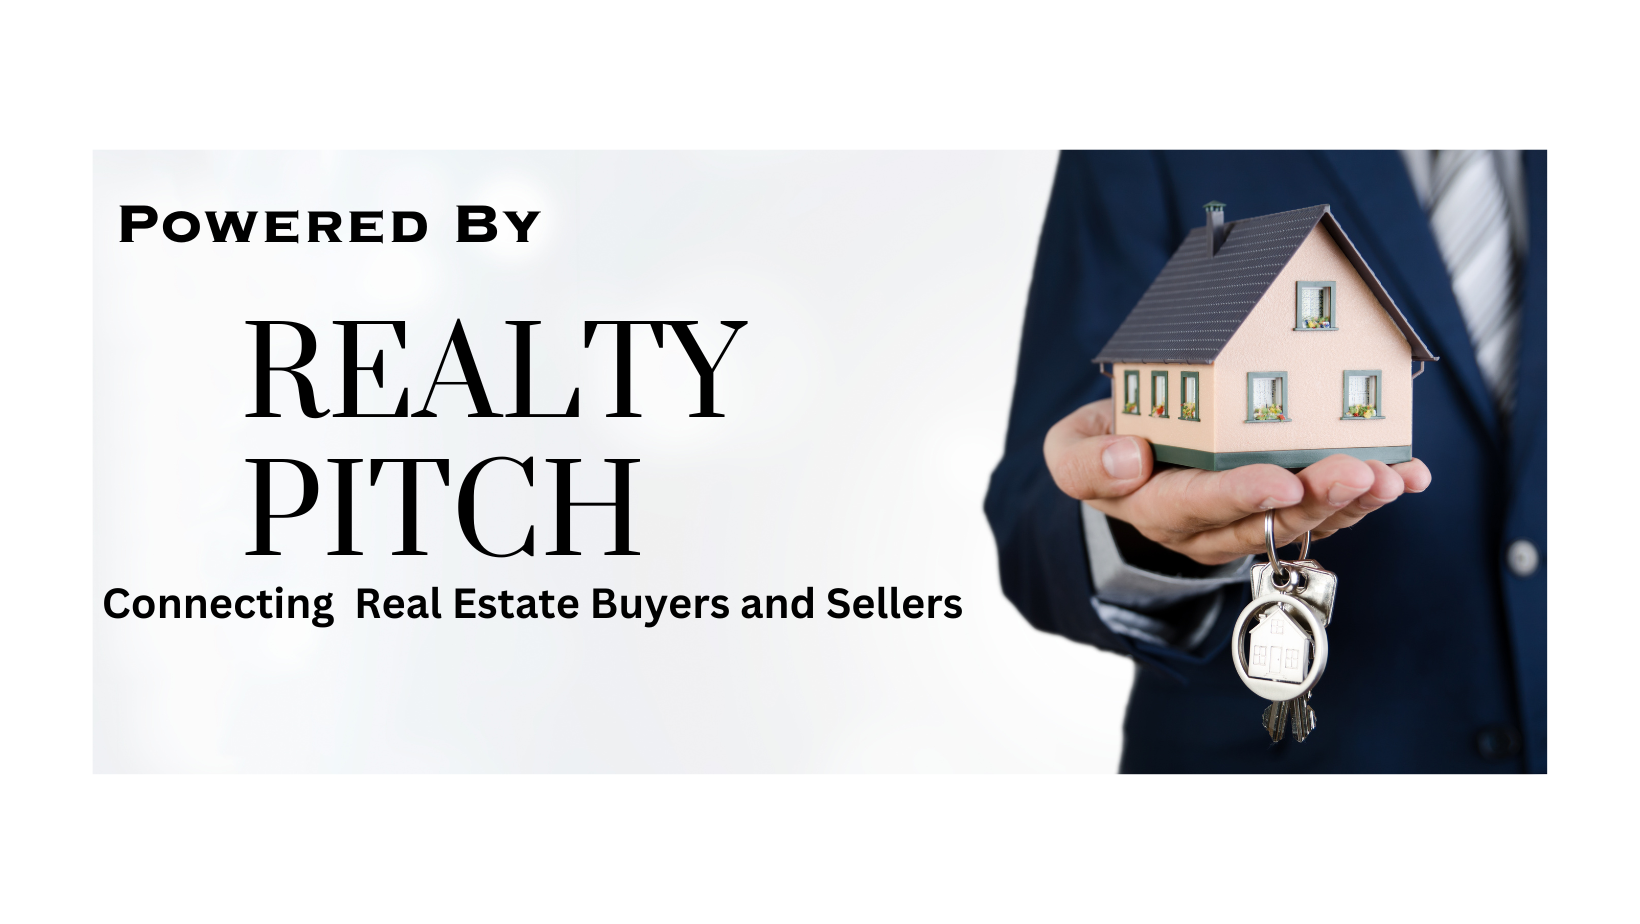 Realty Pitch